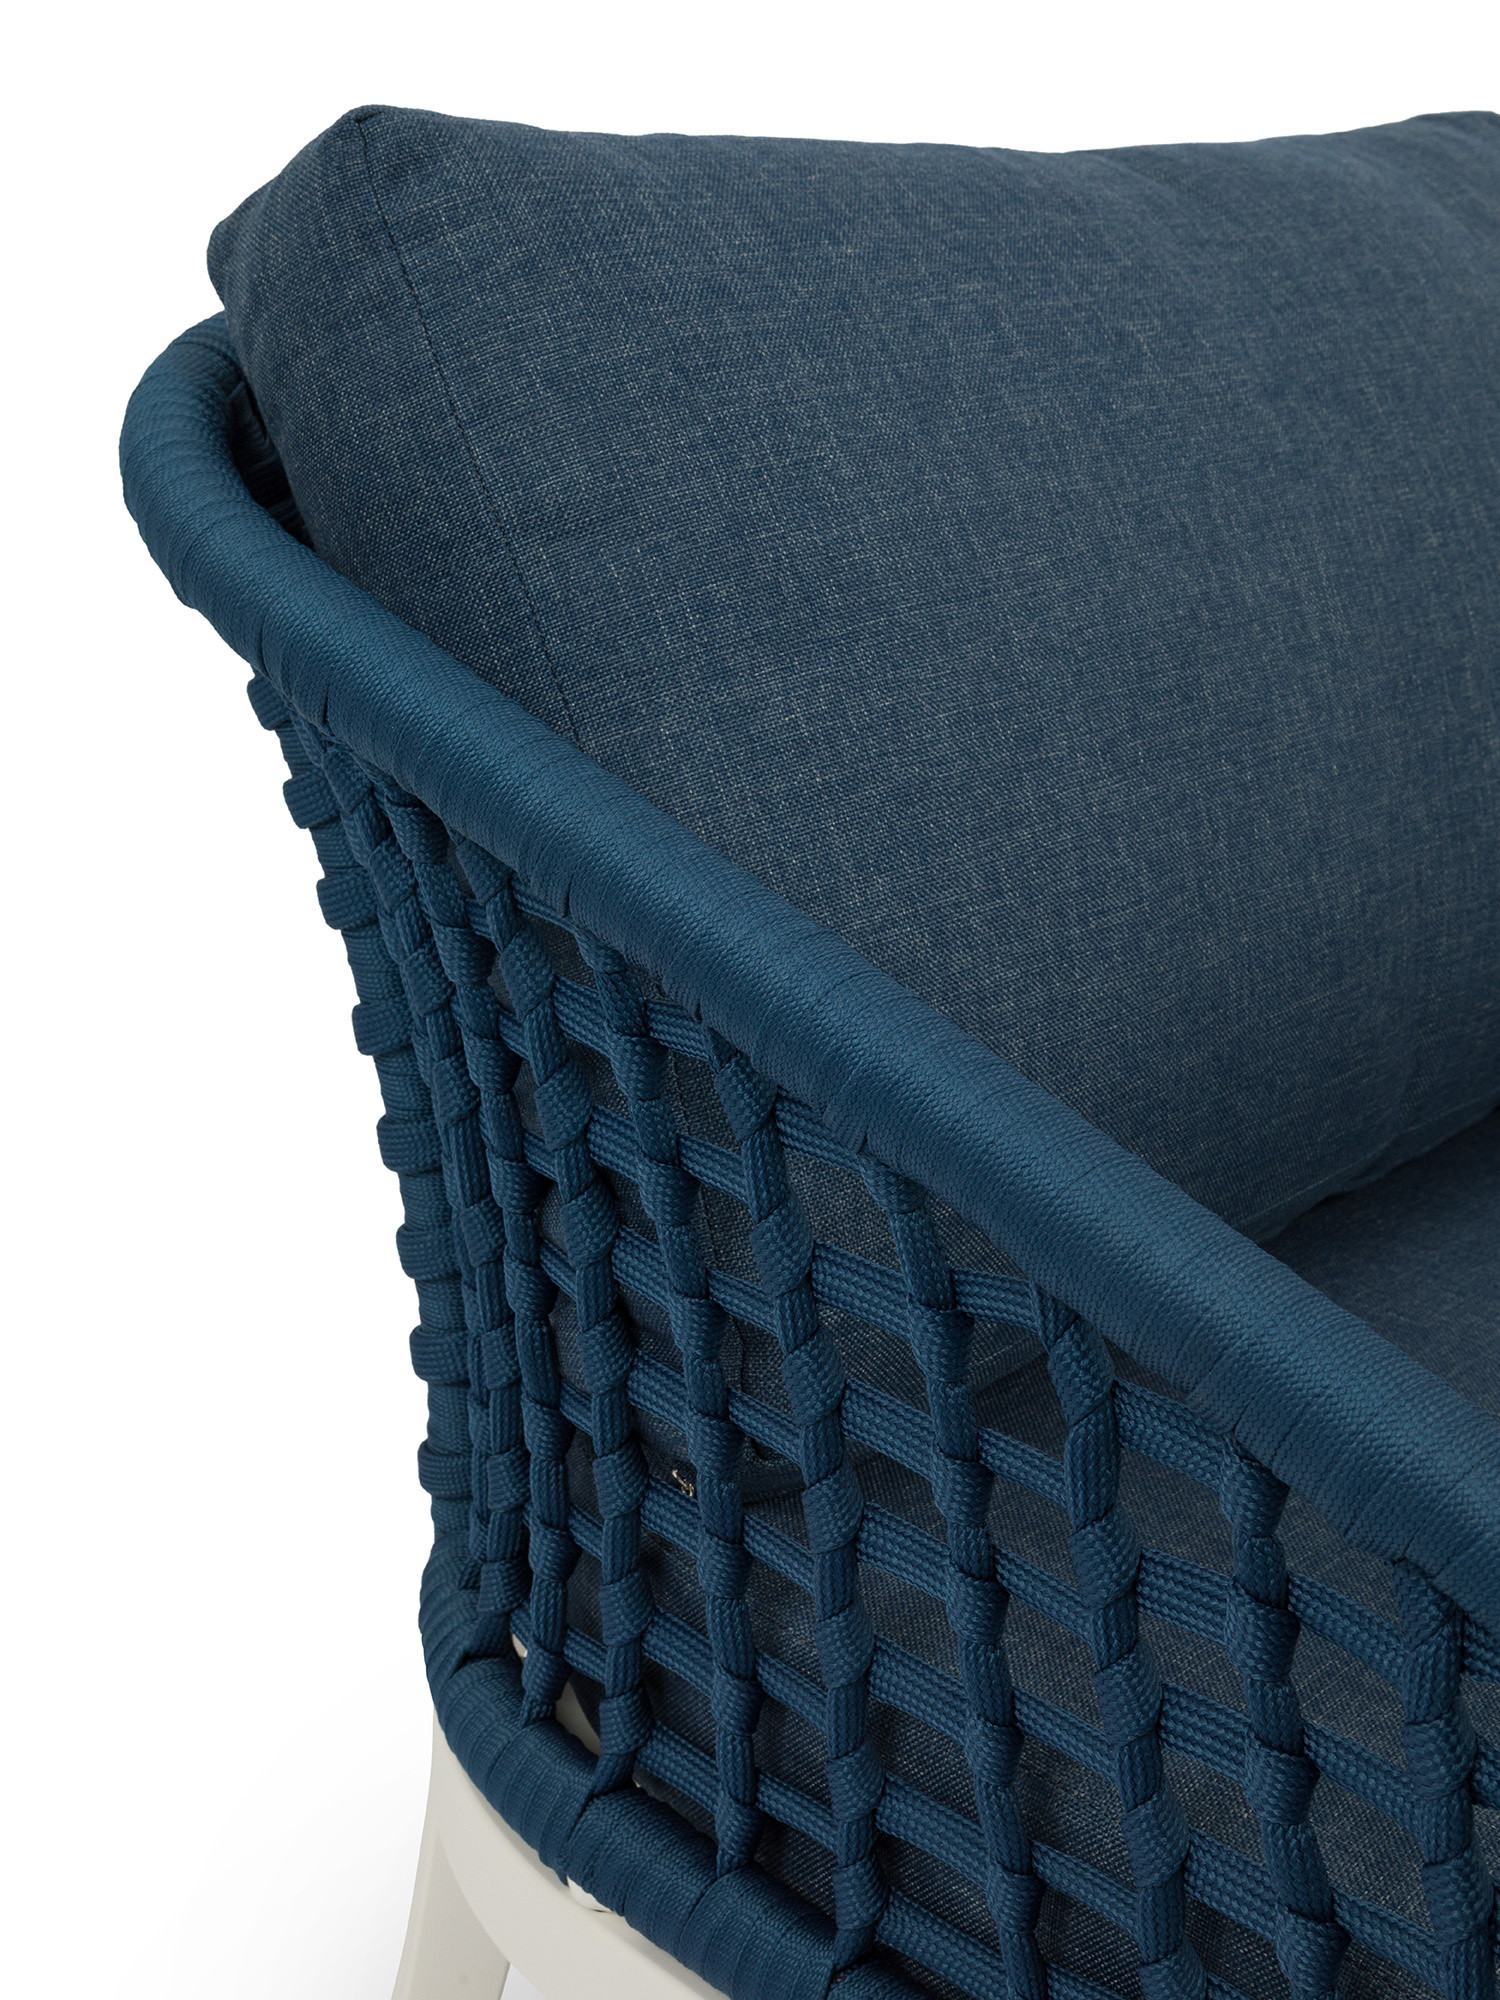 Mediterranean armchair in polyester and aluminium, Blue, large image number 2